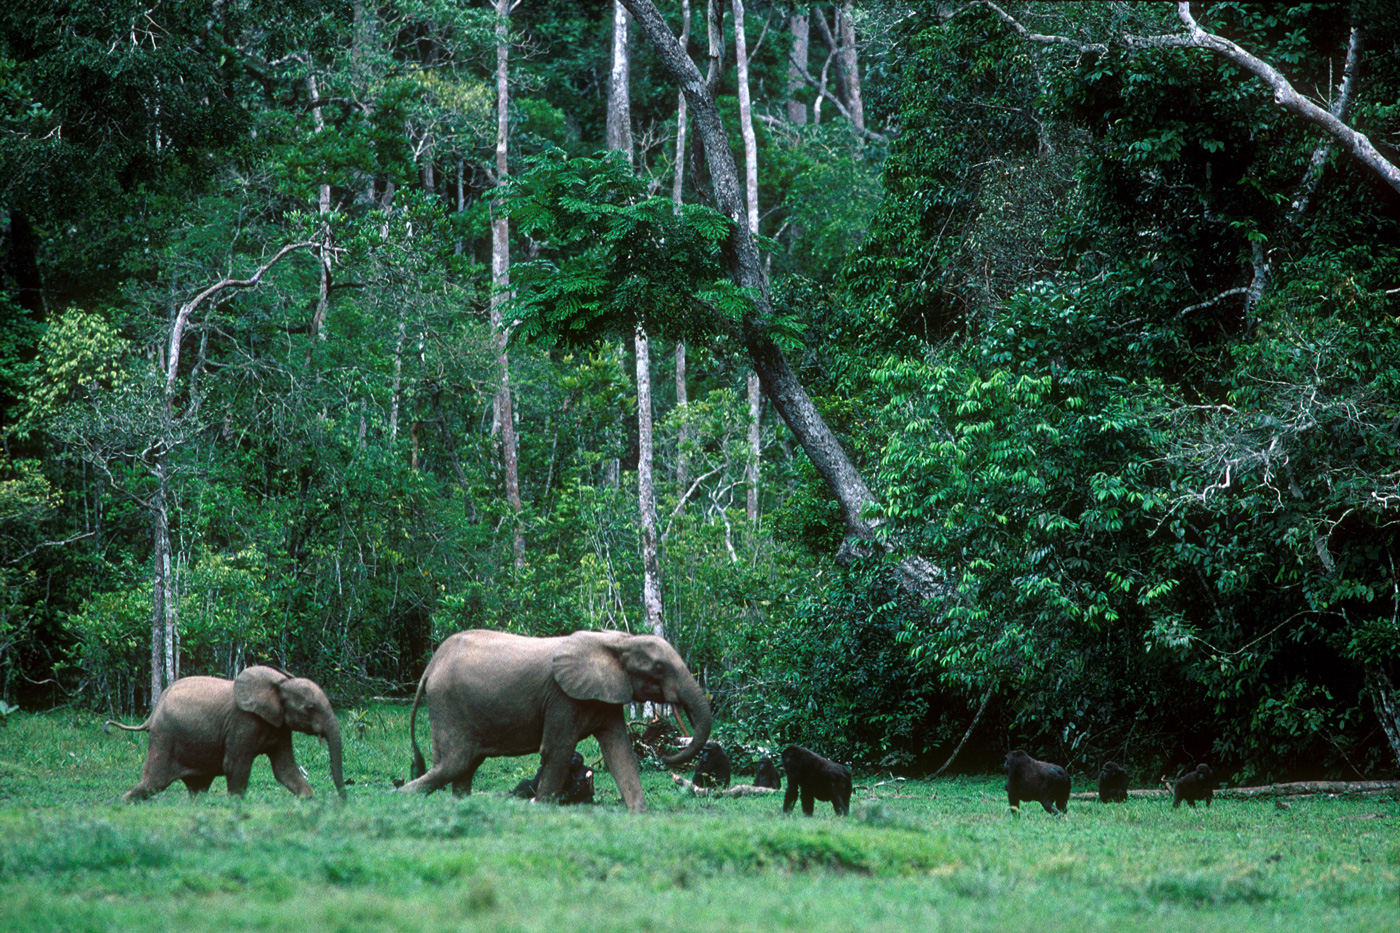 Western lowland gorillas and Forest elephants in clearing in tropical rainforest, Obandas Bai, Odzala NP, Republic of Congo